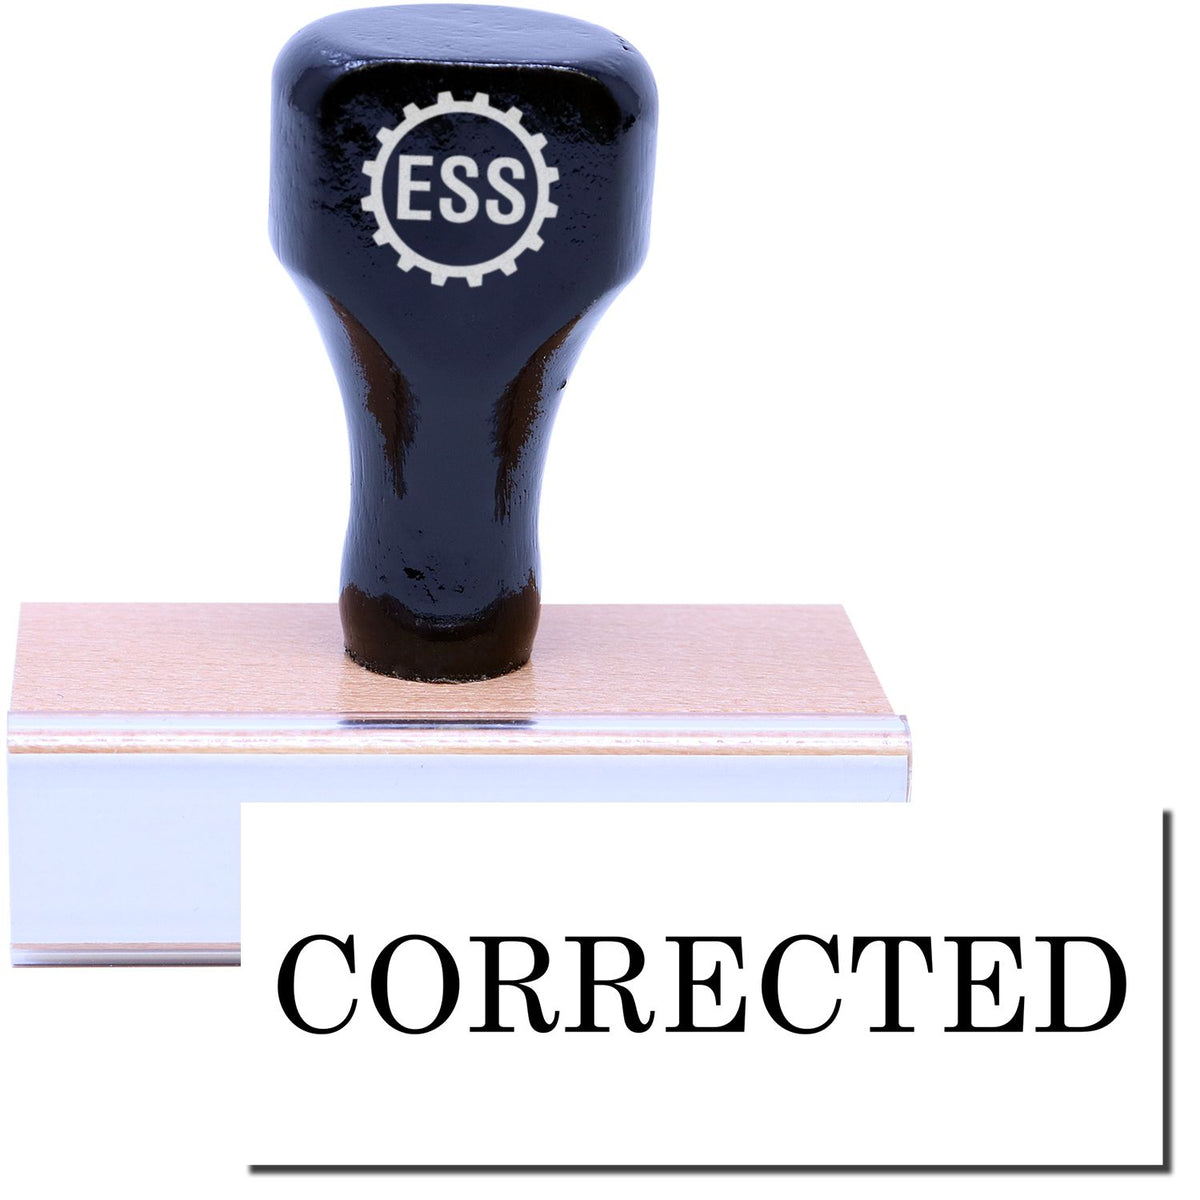 A stock office rubber stamp with a stamped image showing how the text &quot;CORRECTED&quot; in a large font is displayed after stamping.